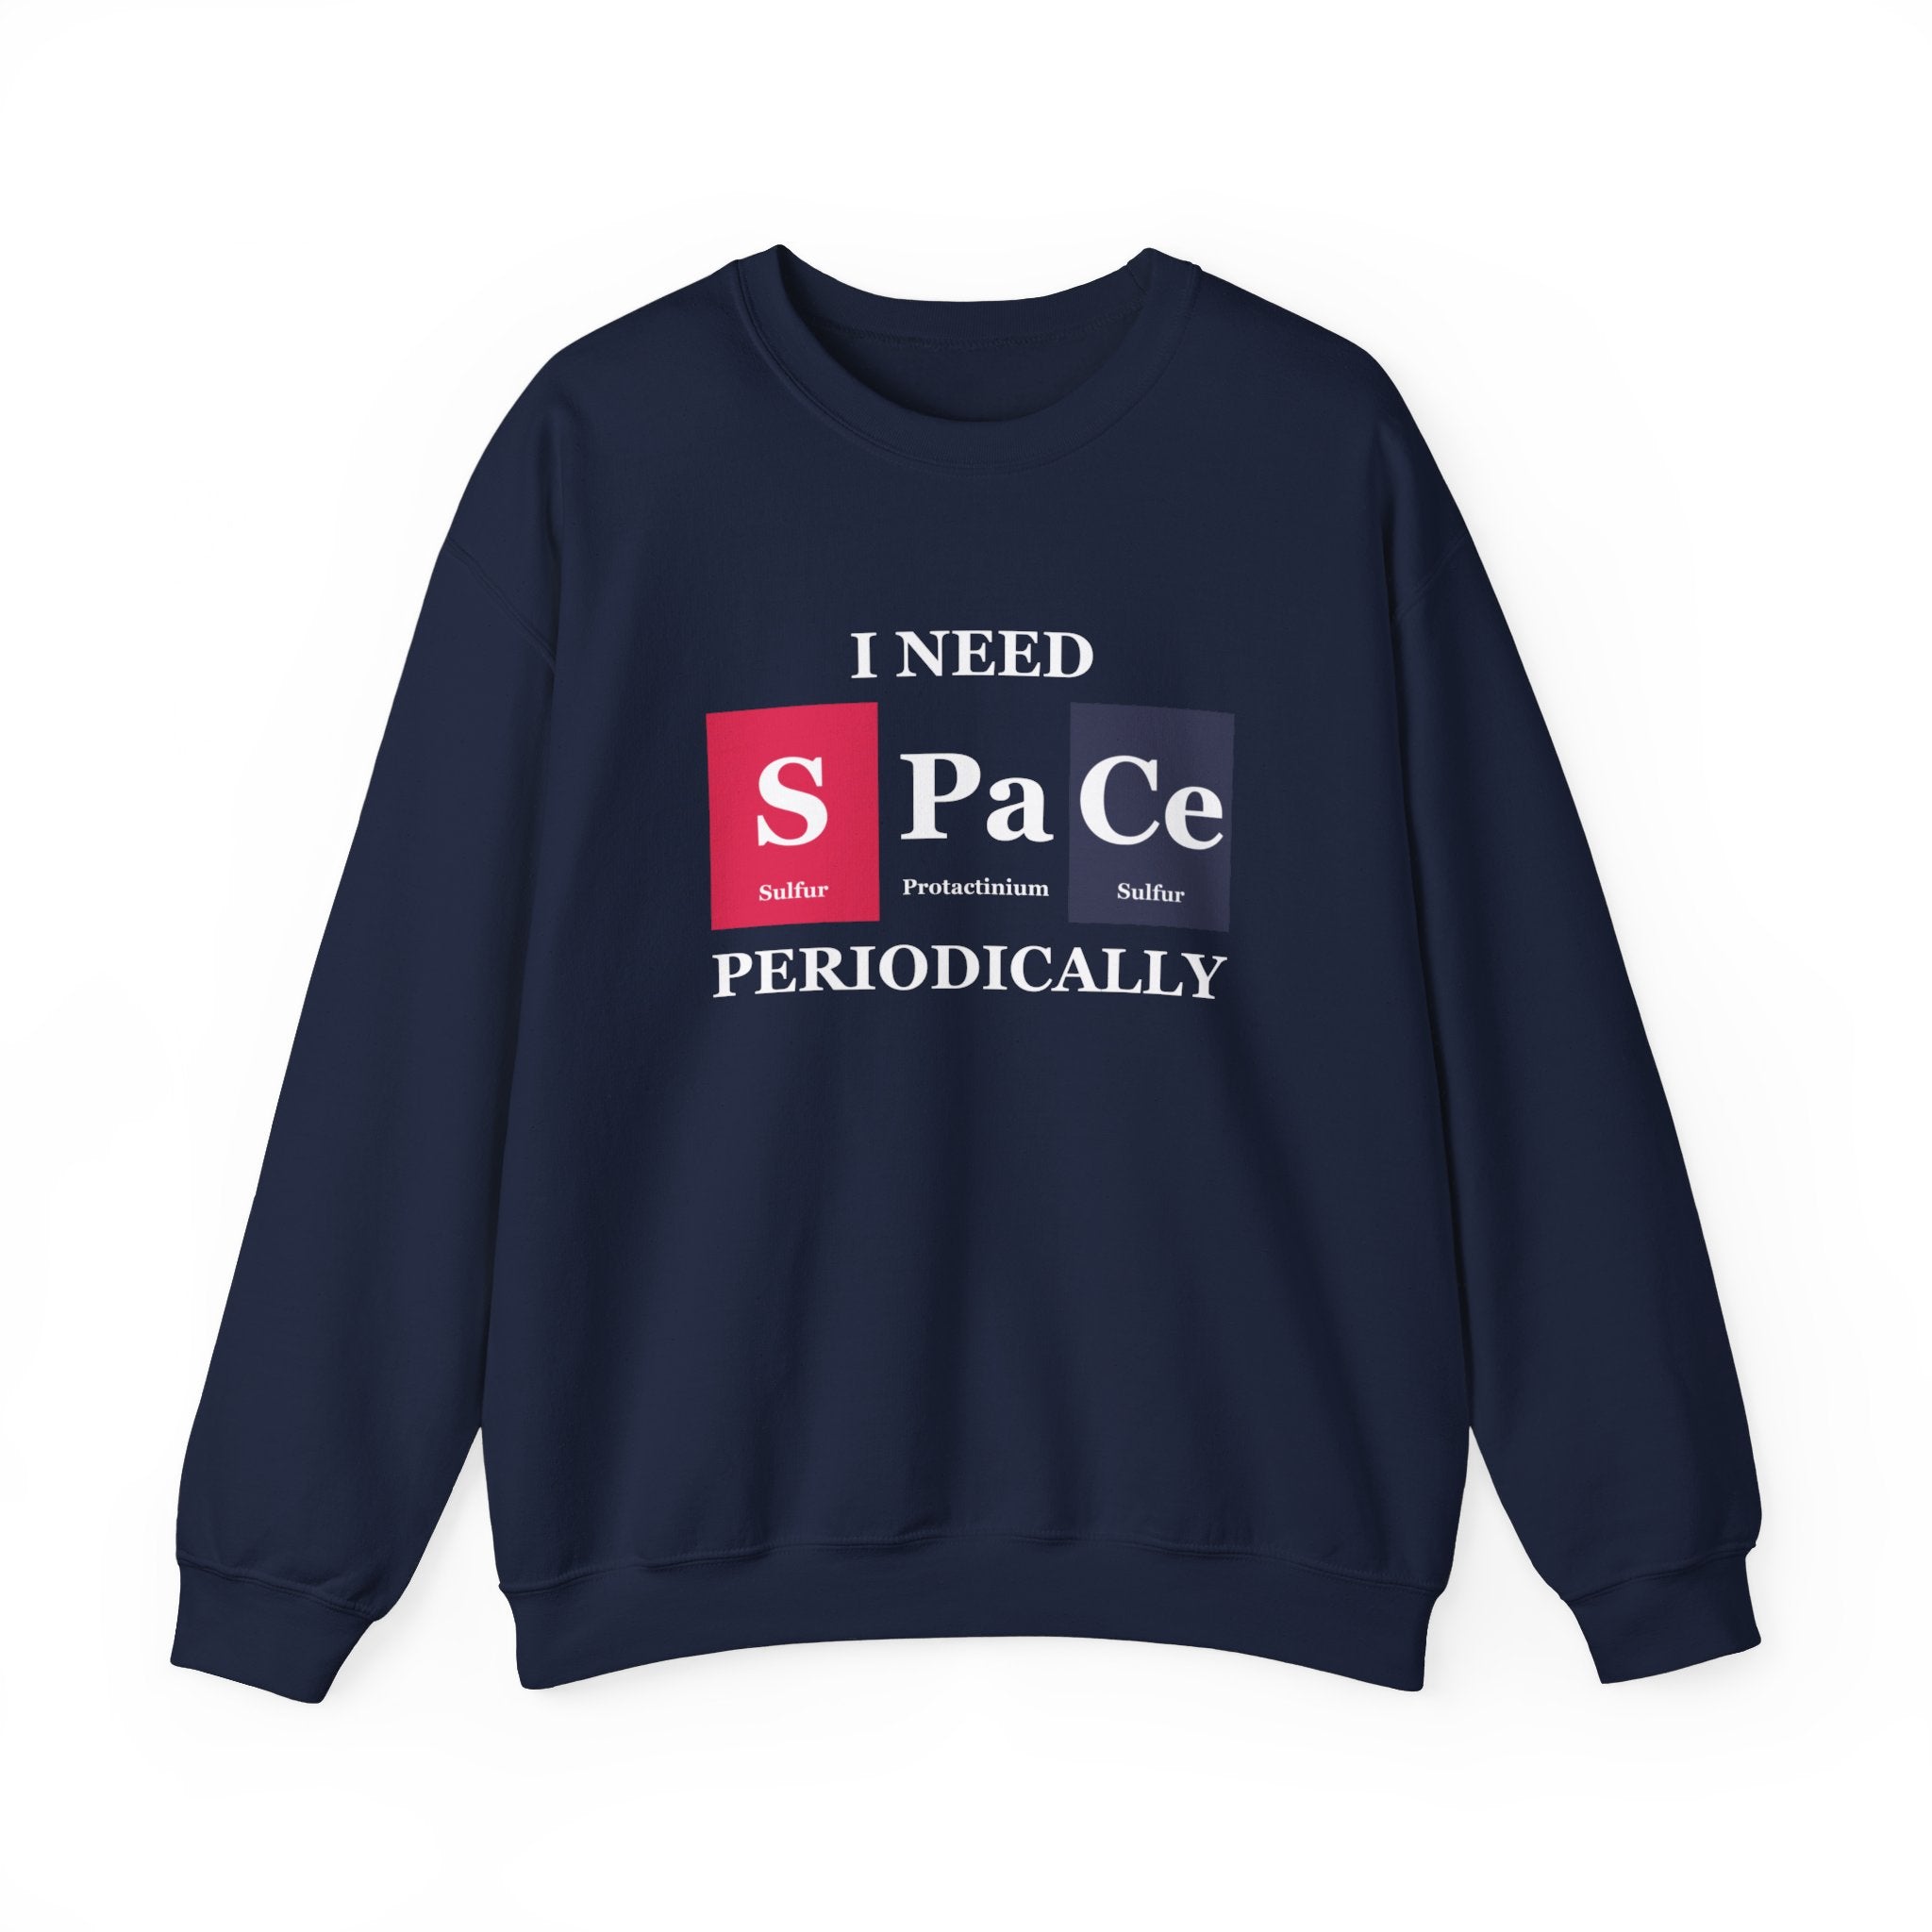 A navy blue S-Pa-Ce - Sweatshirt perfect for winter, featuring the text "I NEED S Pa Ce PERIODICALLY" using periodic table elements: Sulfur, Protactinium, and Cerium. Embrace coziness with this clever and stylish piece.